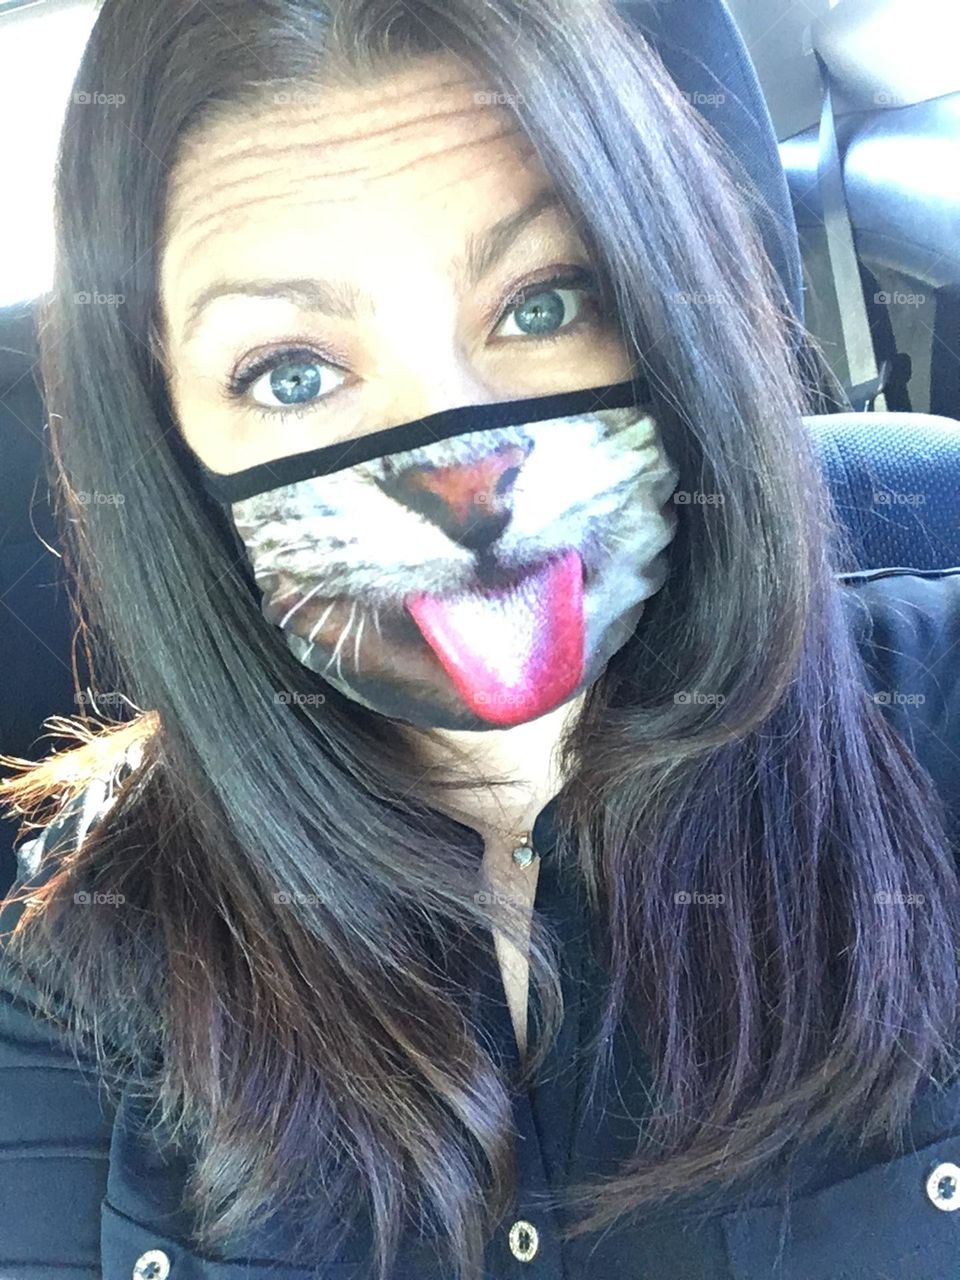 Long dark hair with a kitty mask selfie